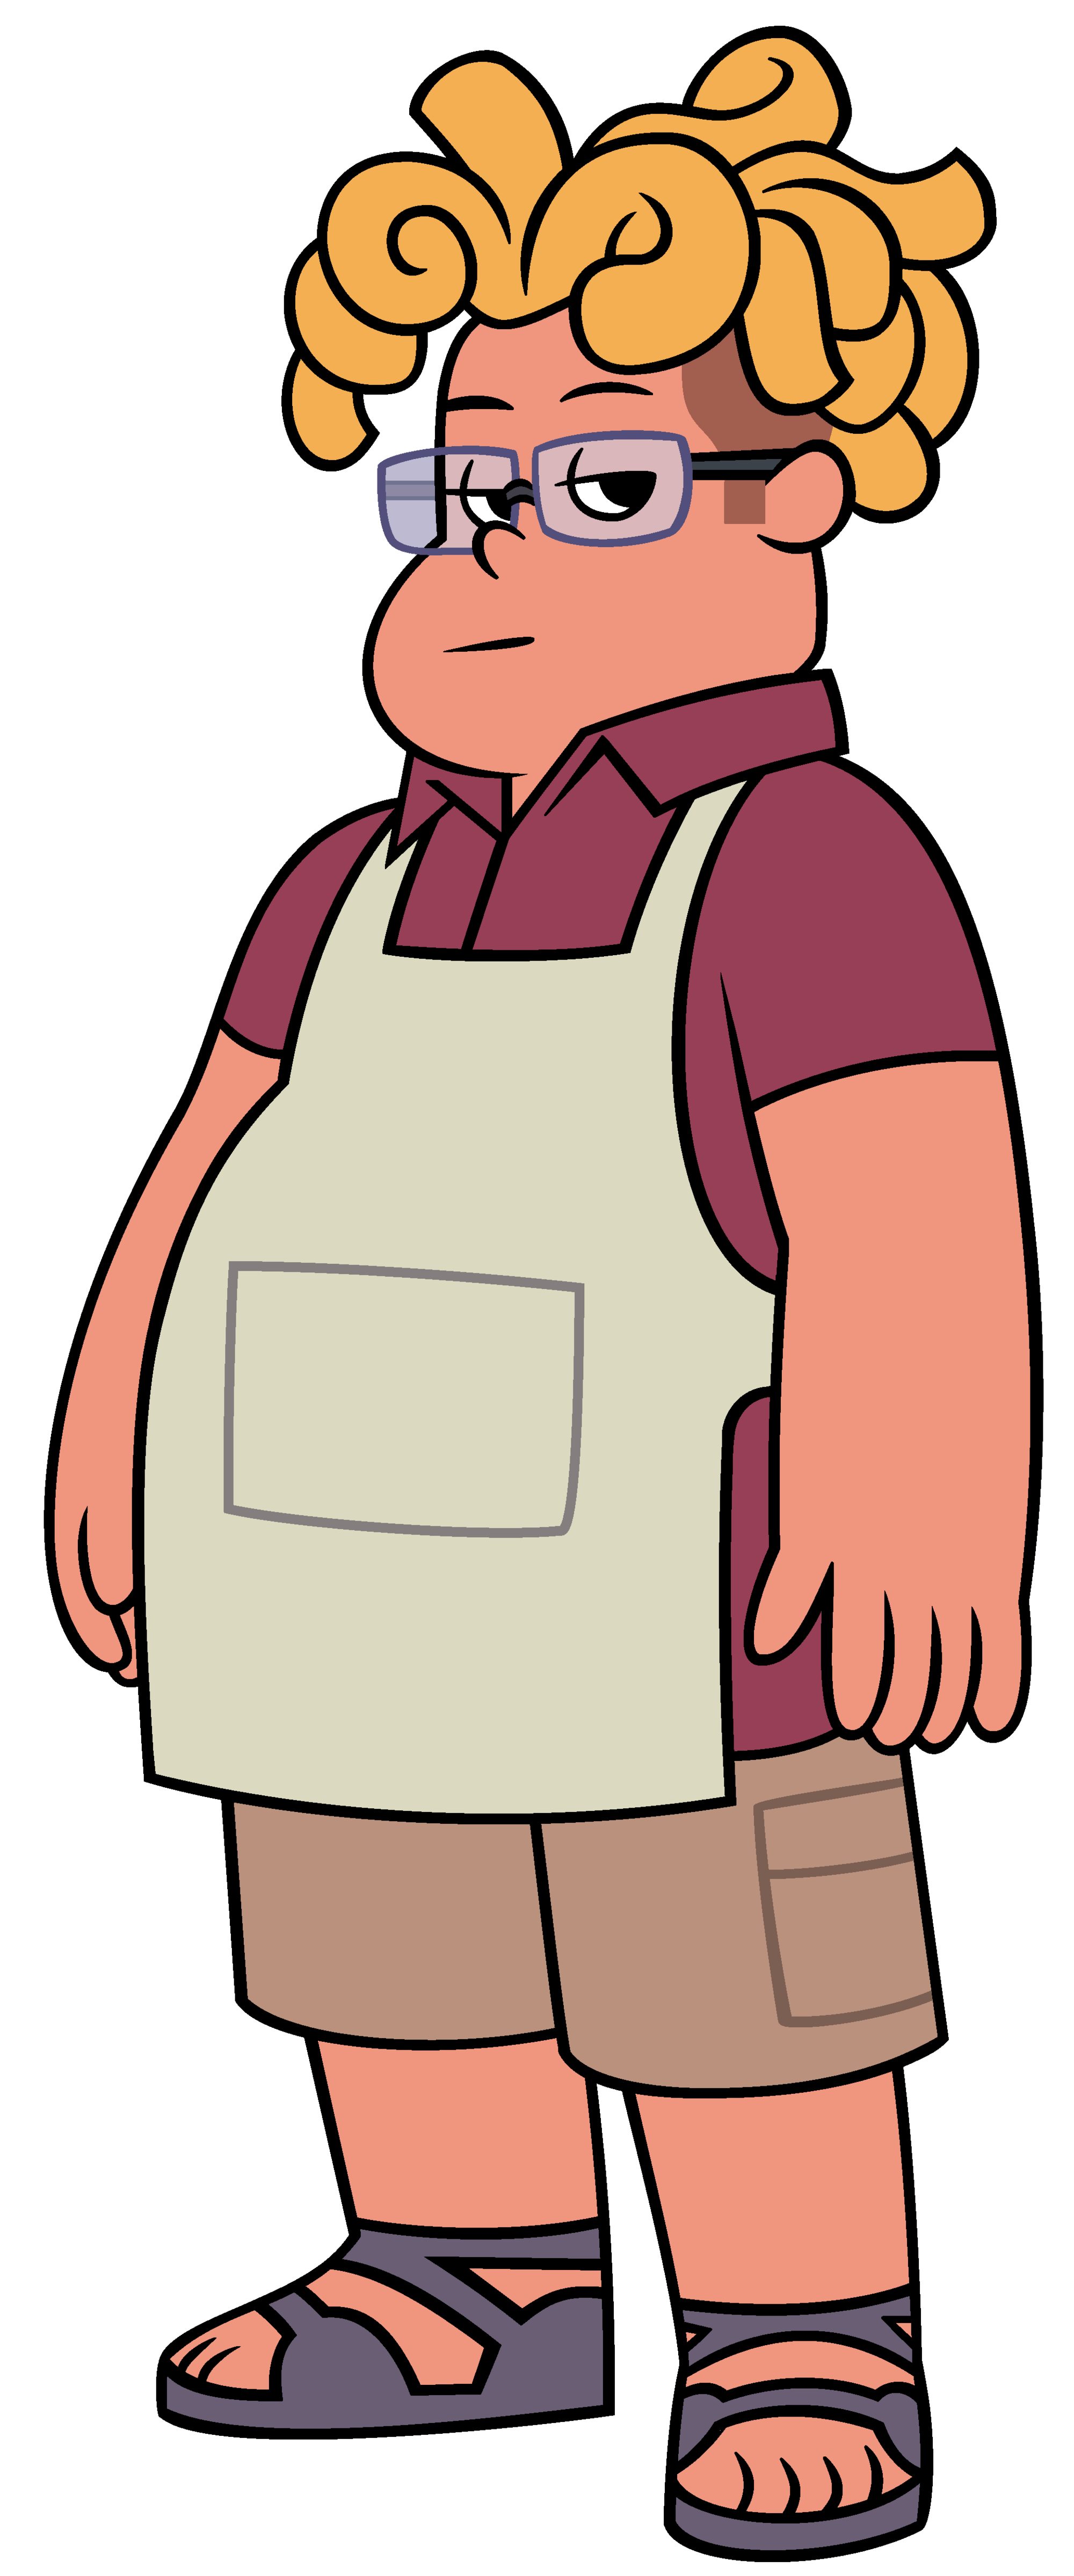 Ronaldo fryman steven universe. Excited clipart speech delivery